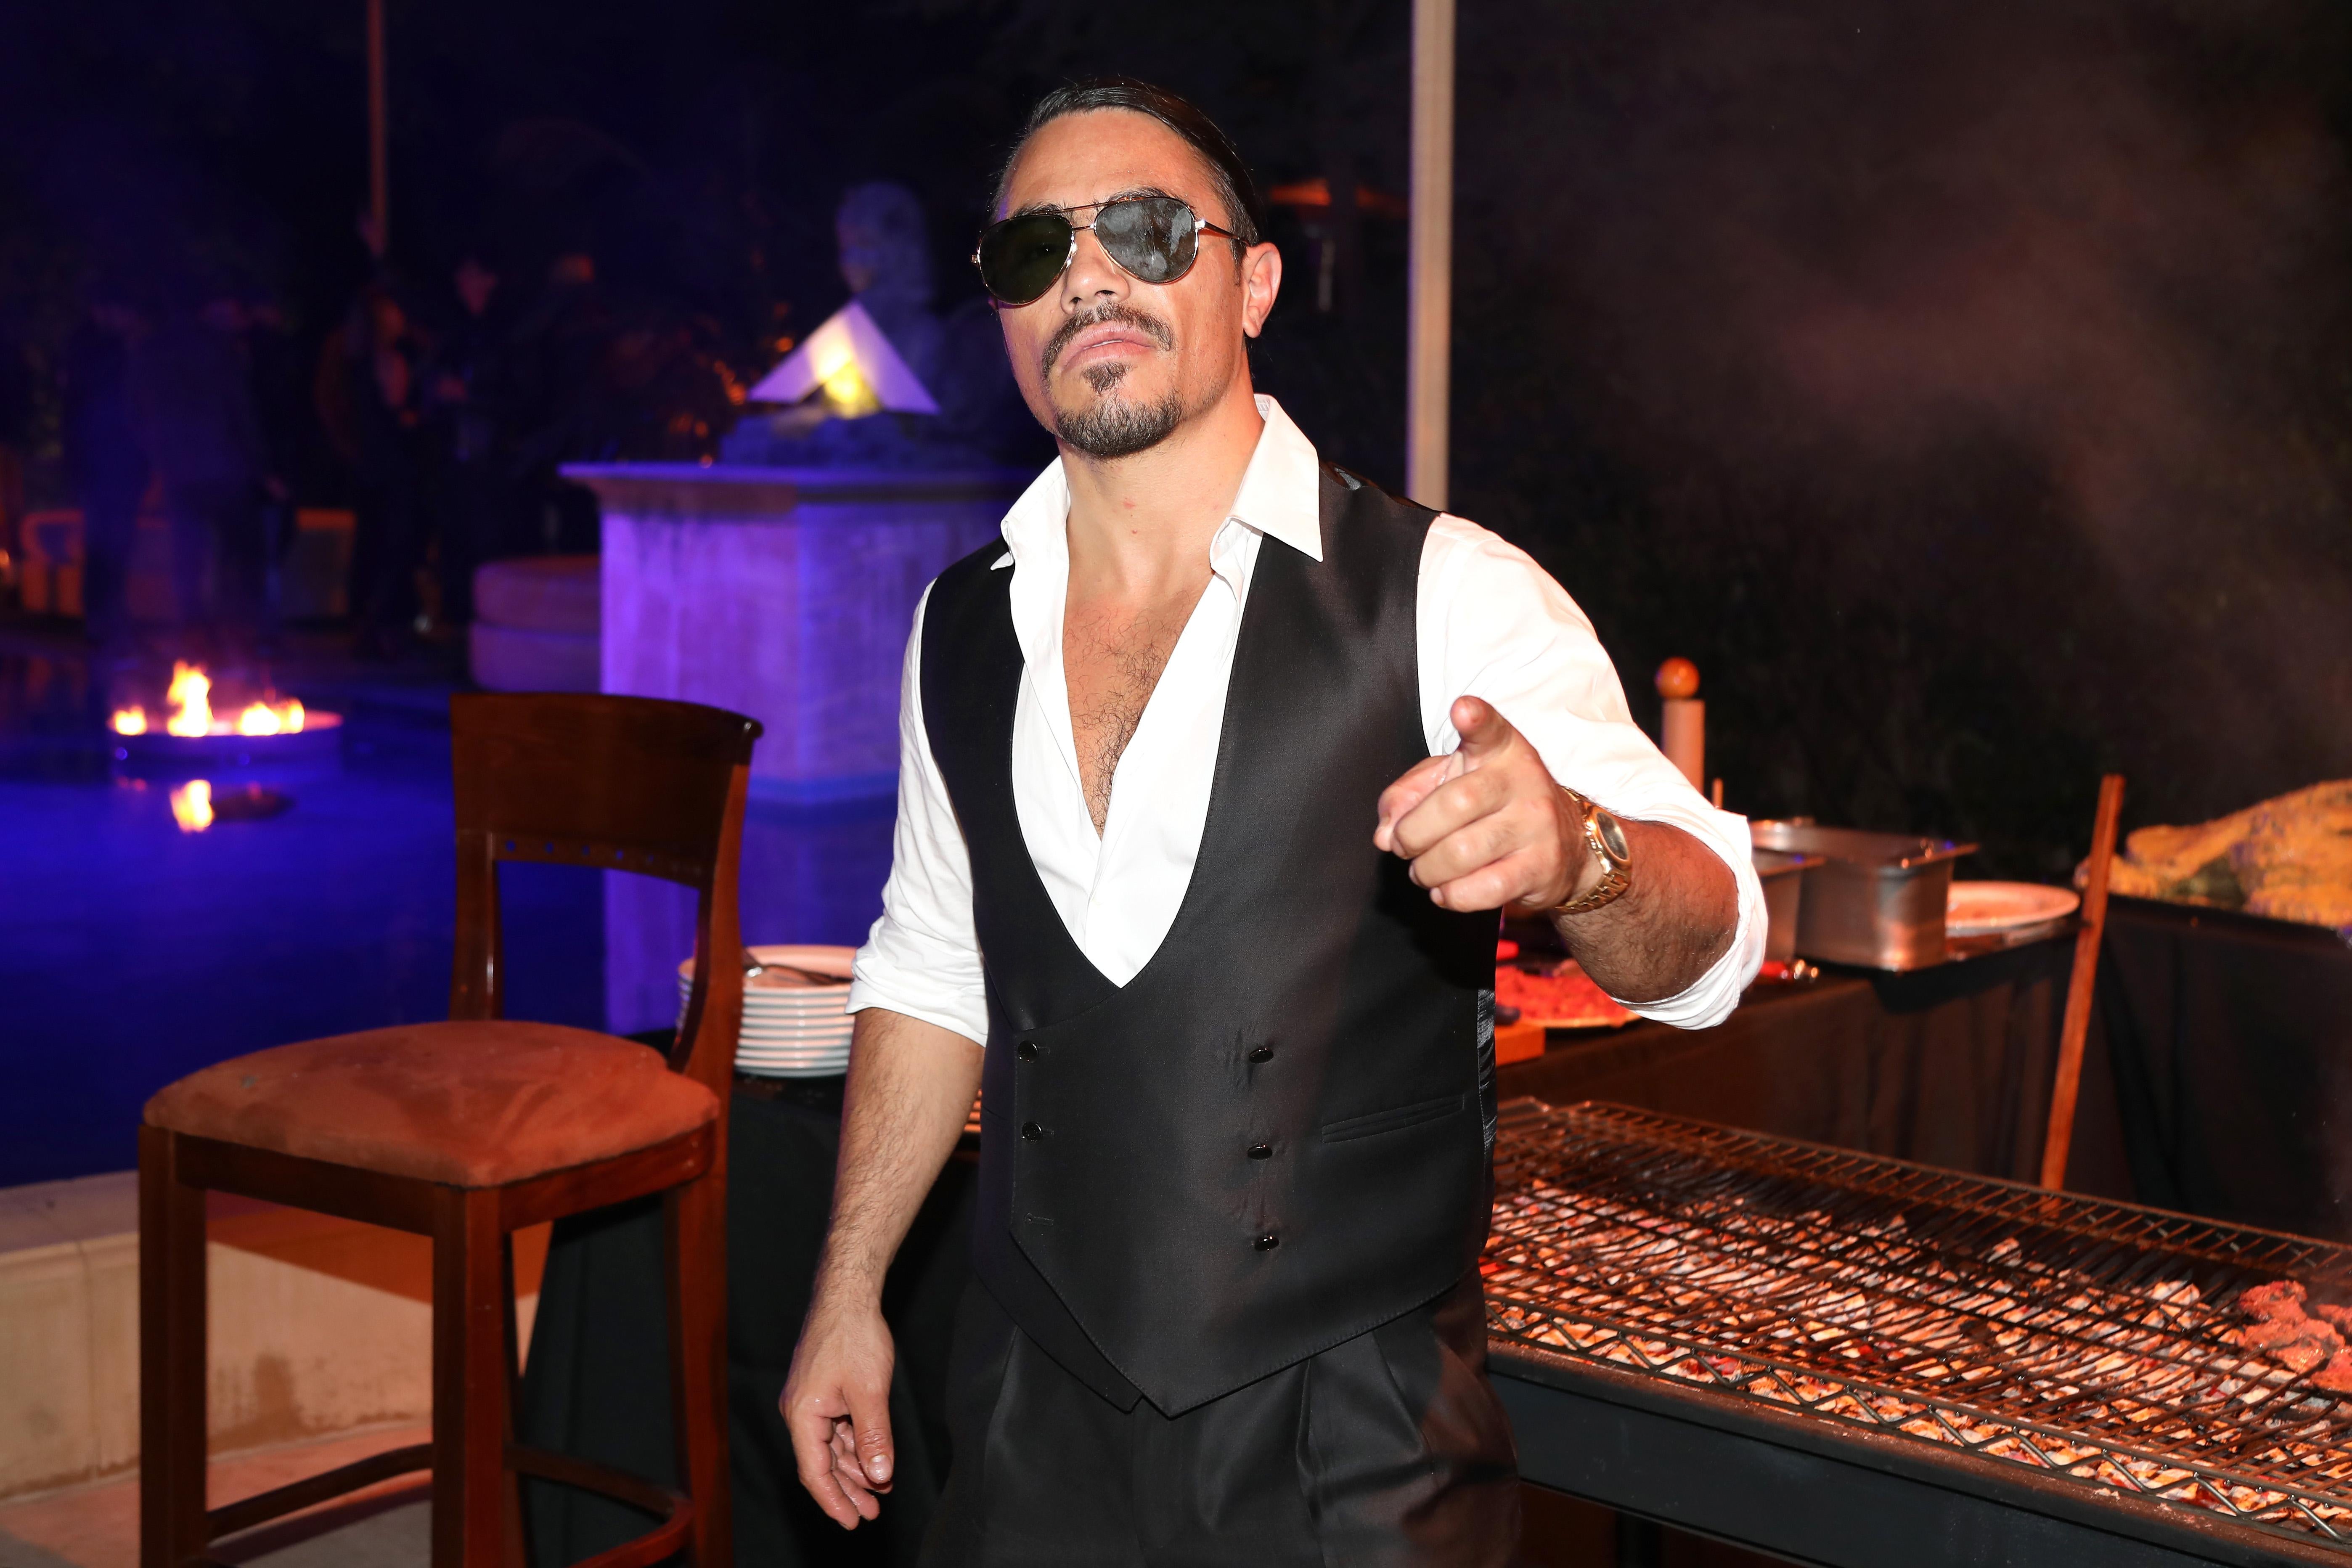 Nusret Gökçe, wearing a low-buttoned shirt and vest with sunglasses, points toward the camera while standing in front of a grill at a partylike setting.